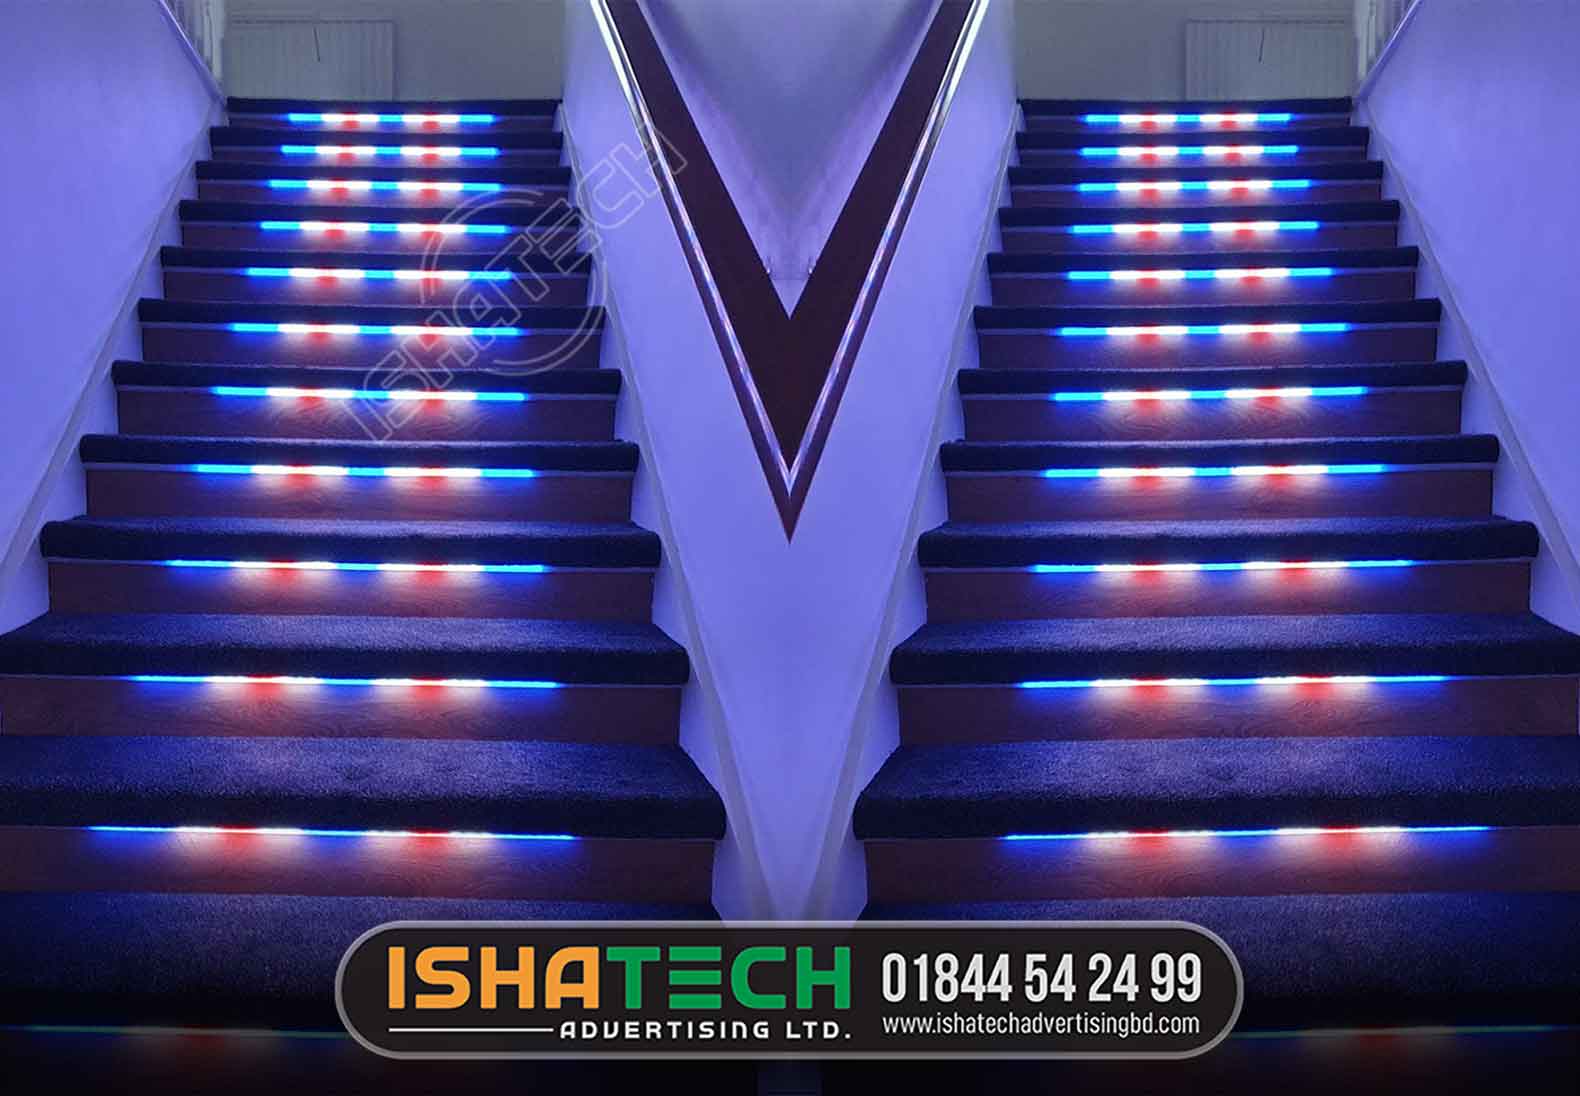 Stair interior design by led ads in dhaka bangladesh price. Best stair interior design by led ads in dhaka bangladesh. led sign board price in bangladesh. led display board suppliers in bangladesh. led sign bd. signboard bd.